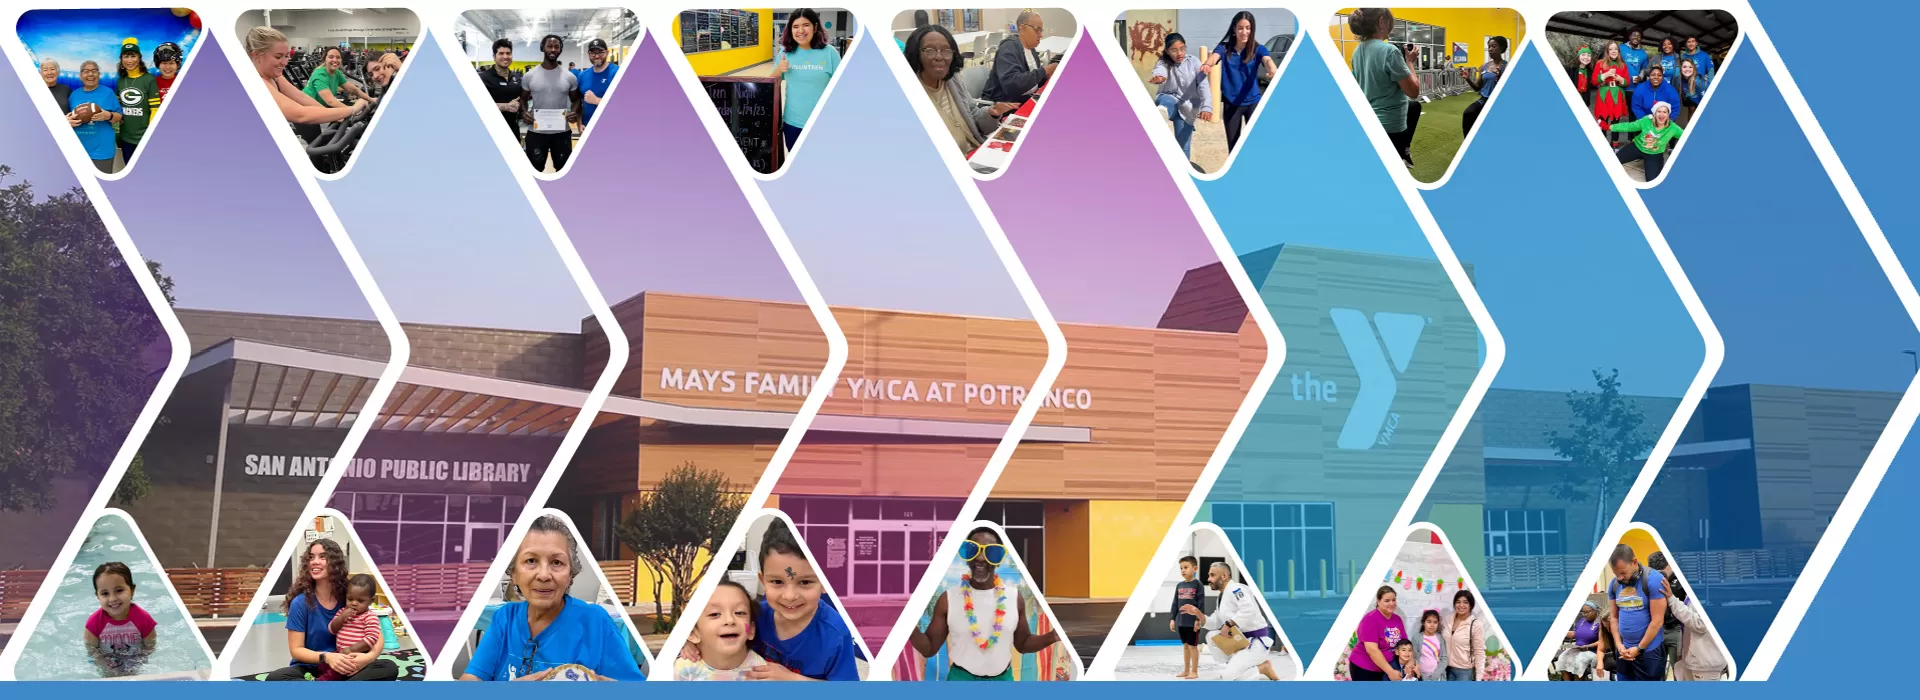 Welcome the the Mays Family YMCA at Potranco